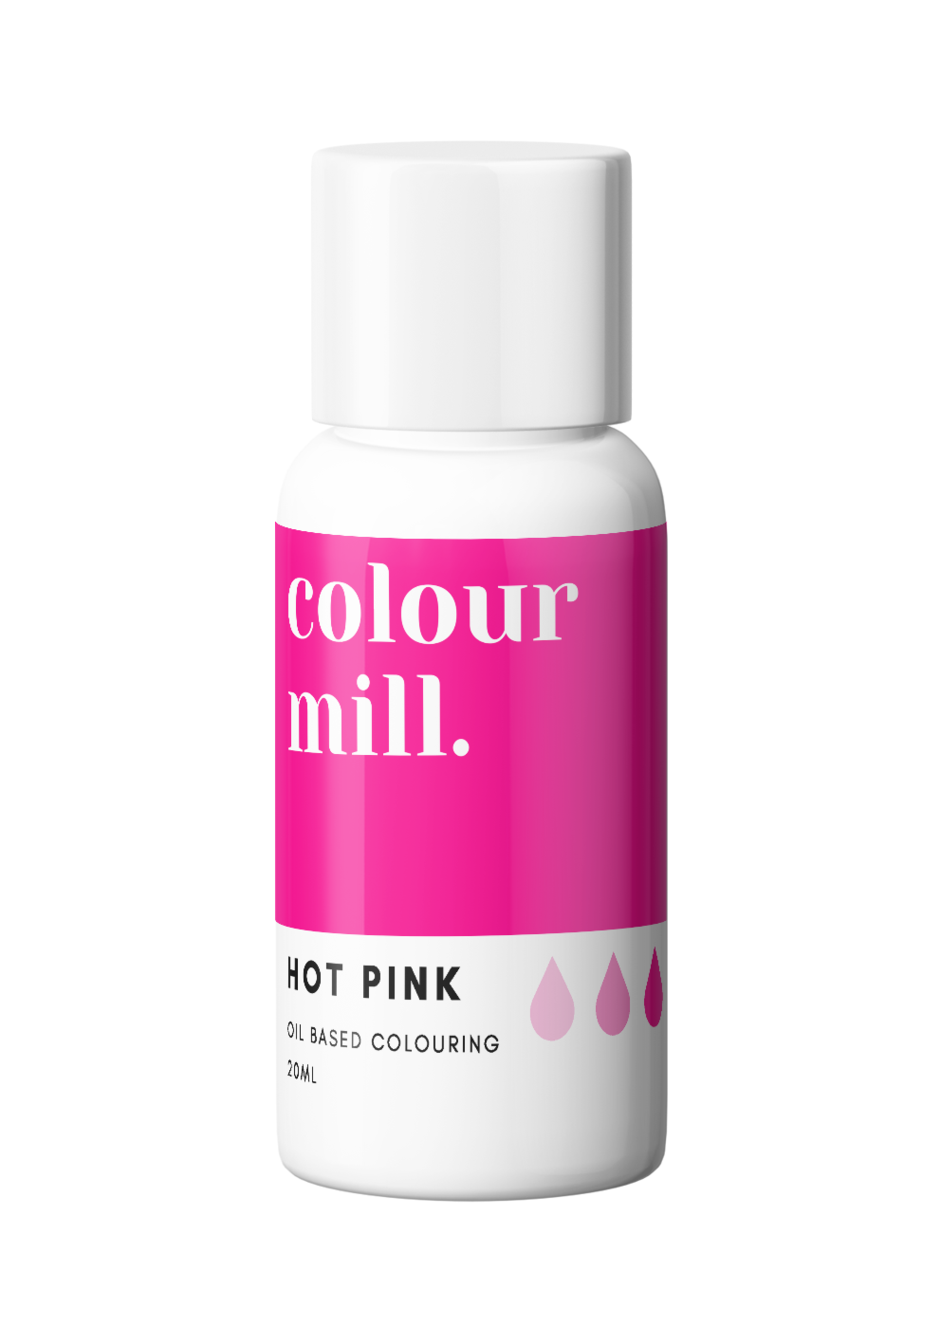 Hot Pink, 20ml, Colour Mill Oil Based Colouring